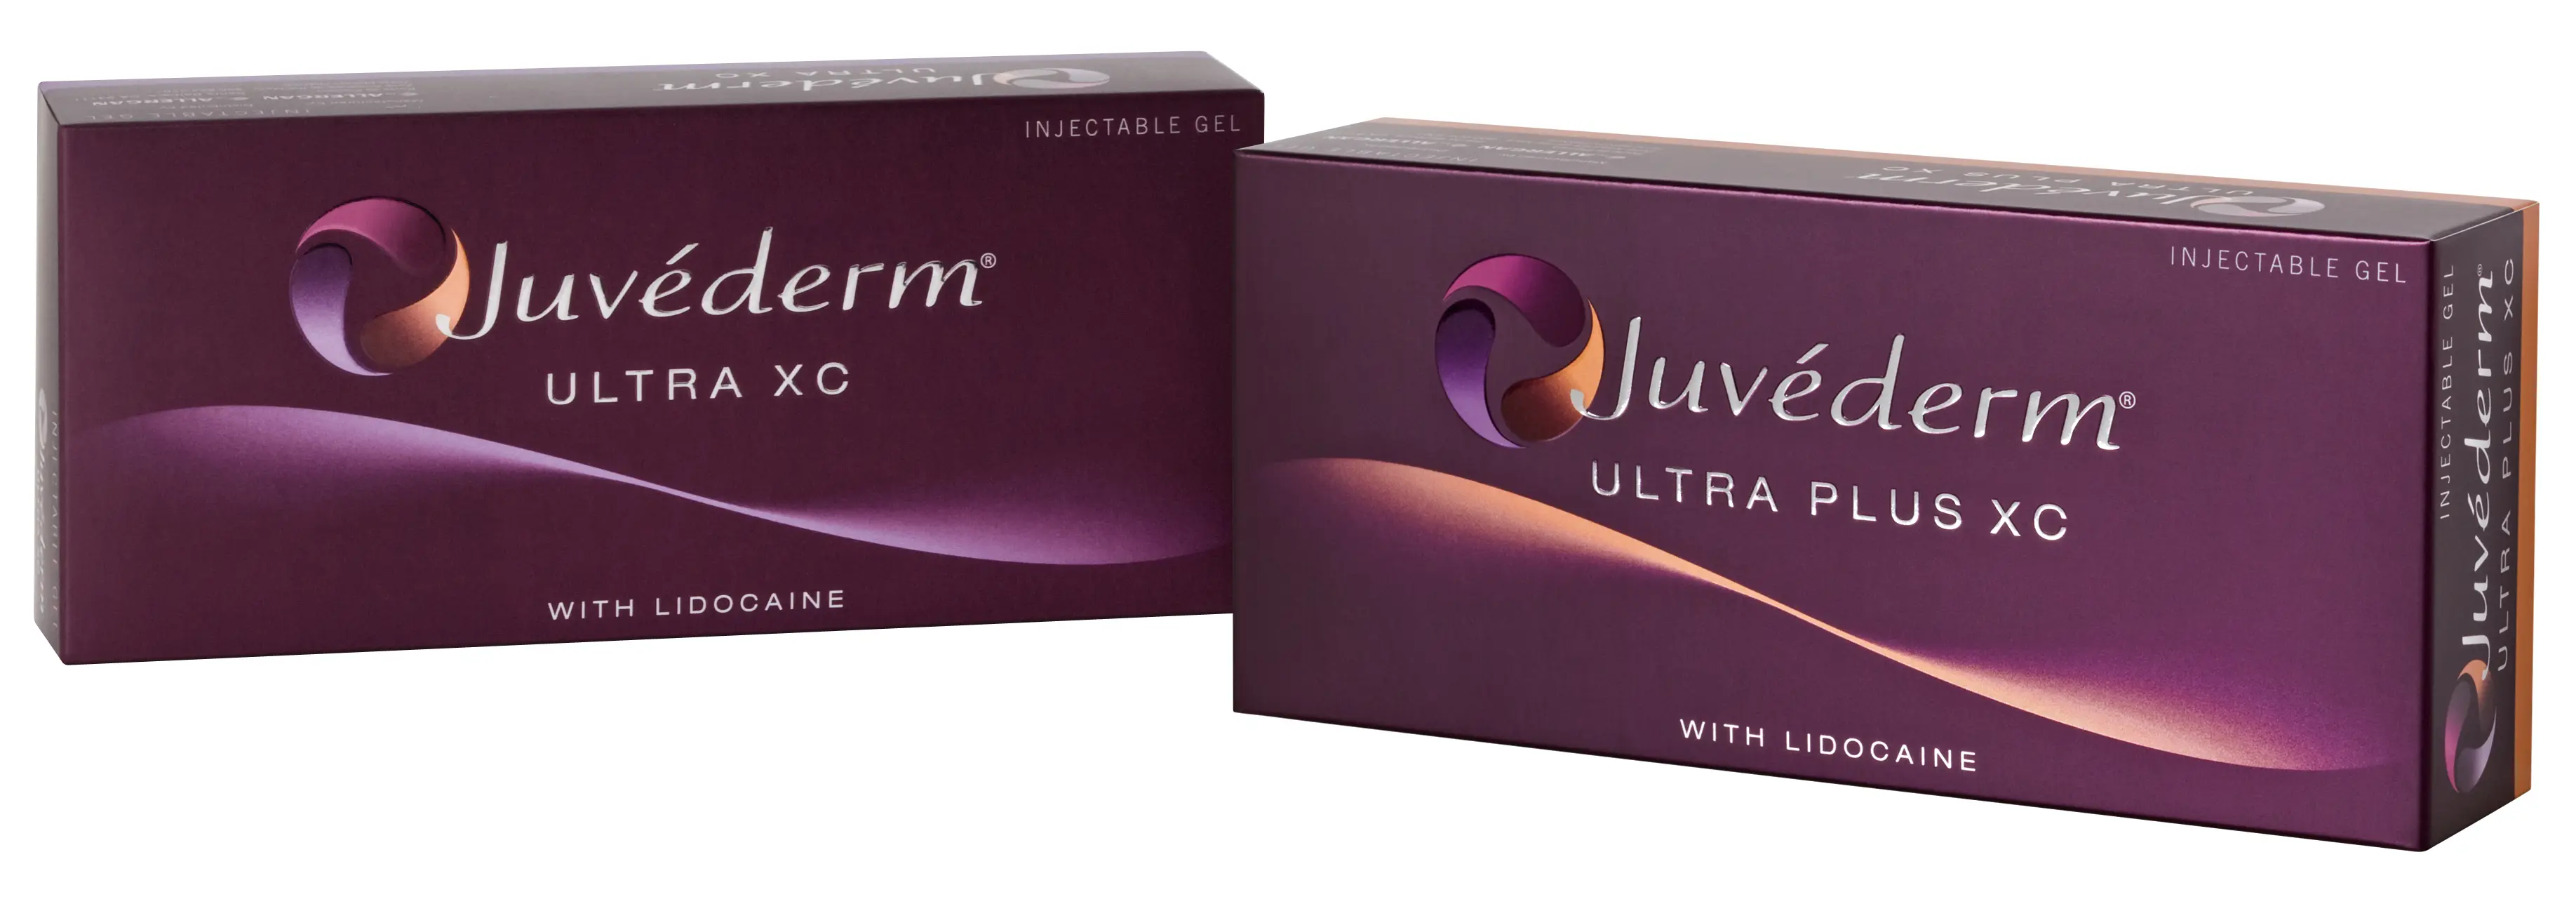 Juvederm Ultra XC and Ultra Plus XC